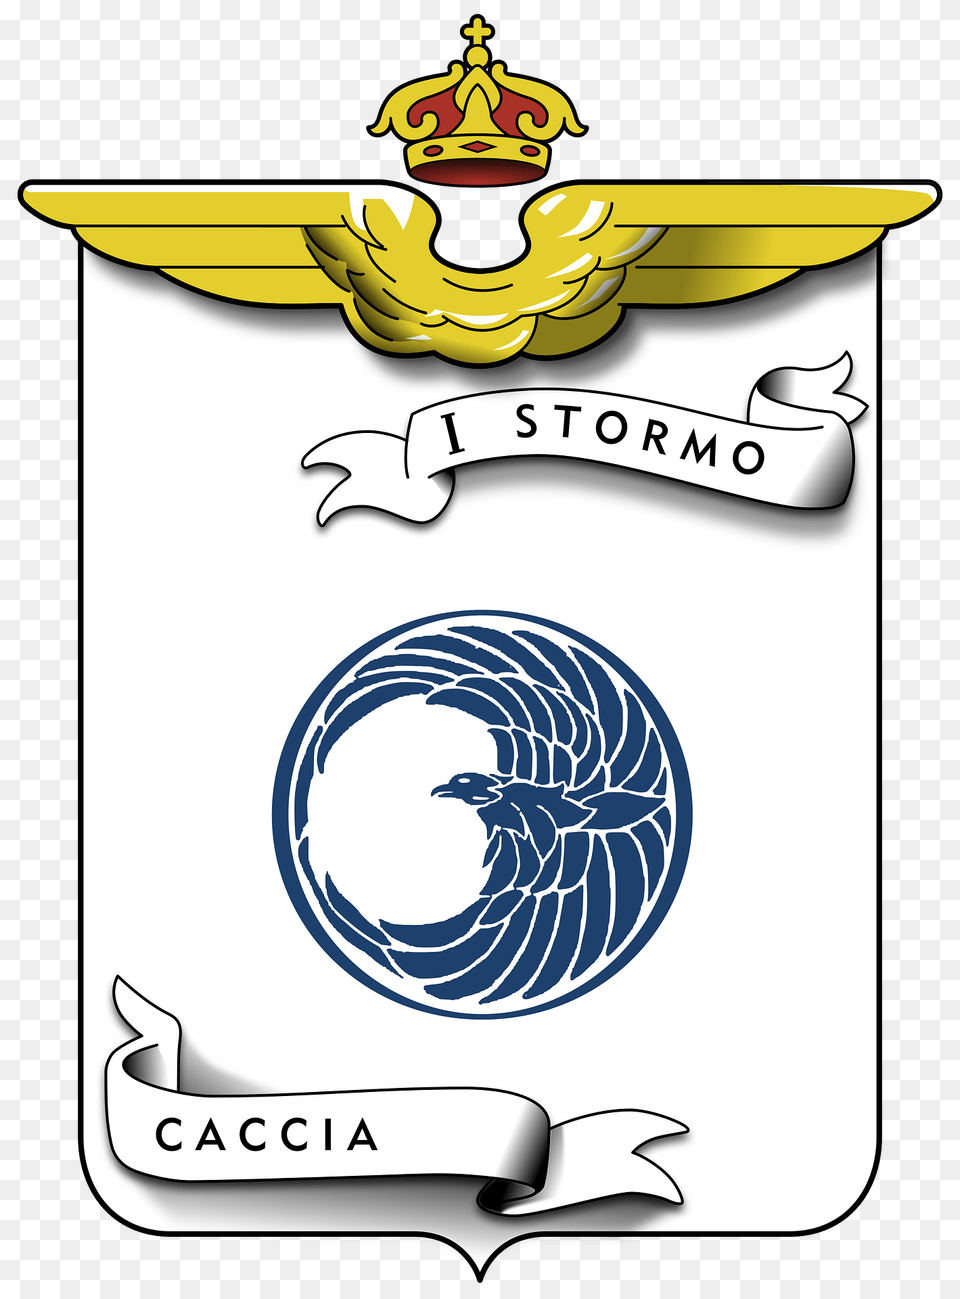 Ensign Of The 1 Stormo Caccia Of The Italian Air Force 1923 1925 Clipart, Logo, Emblem, Symbol, Text Png Image